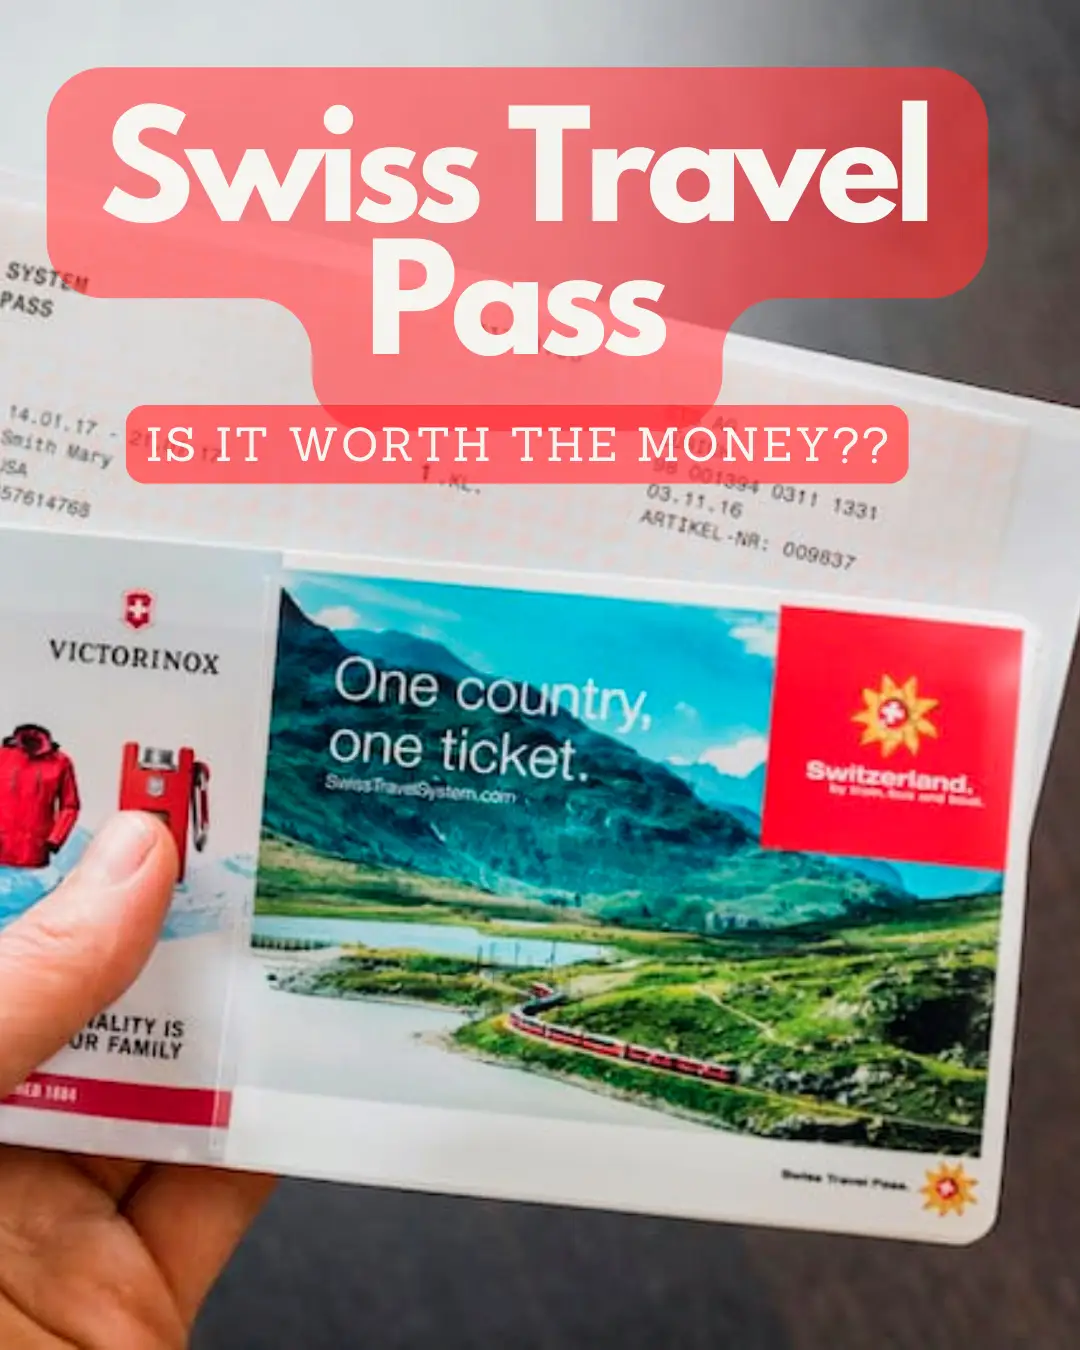 Swiss Travel Pass - do I really need it? 💸 | Gallery posted by  CuriousTraveler | Lemon8